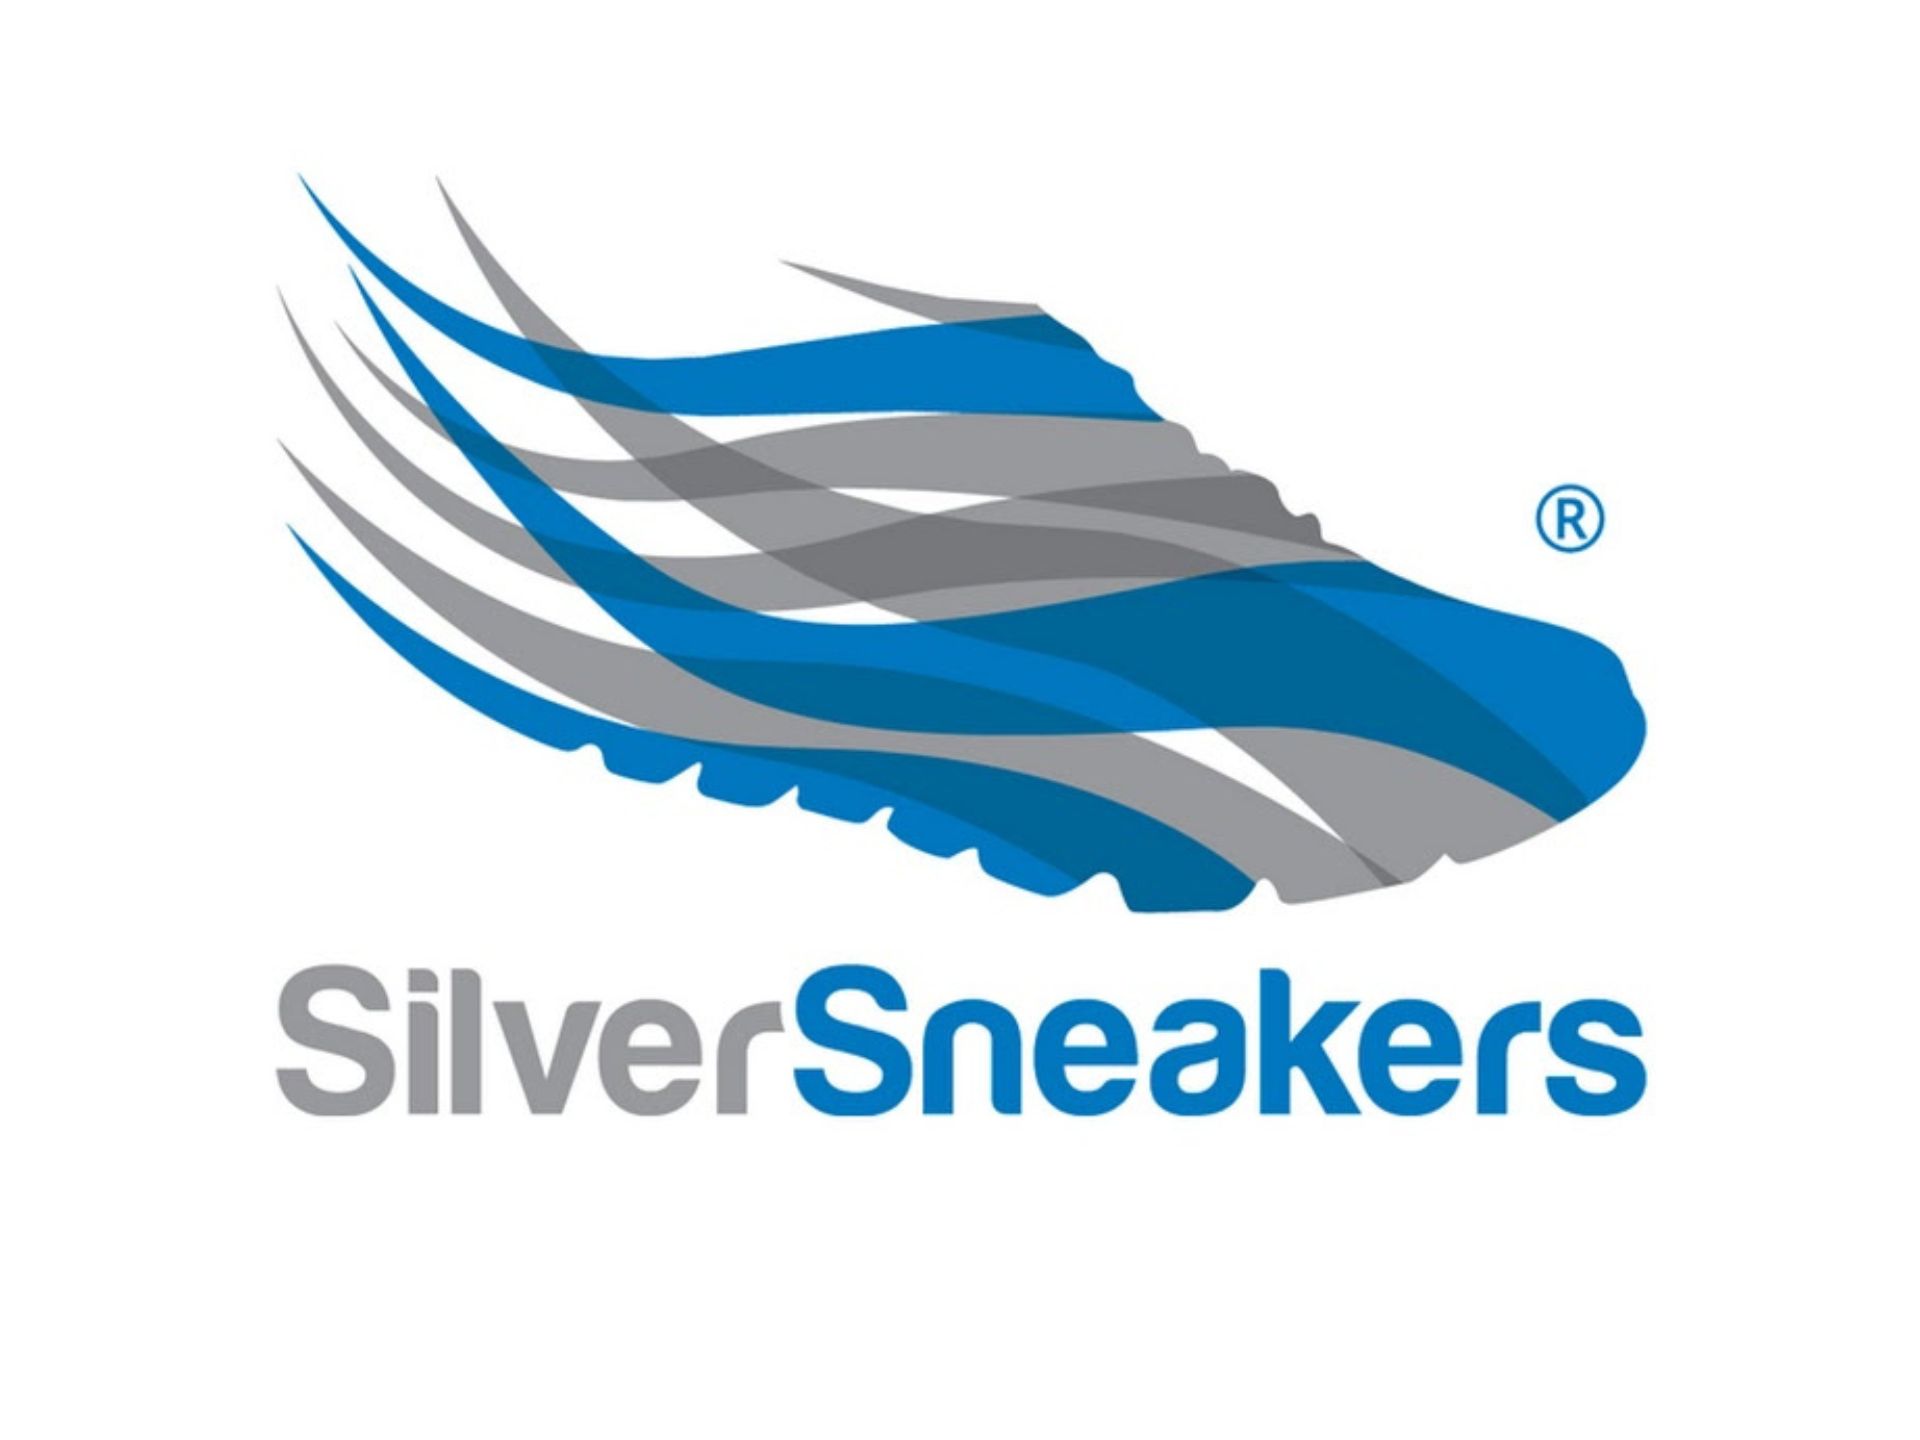 The SilverSneakers logo with an illustration of an abstract shoe